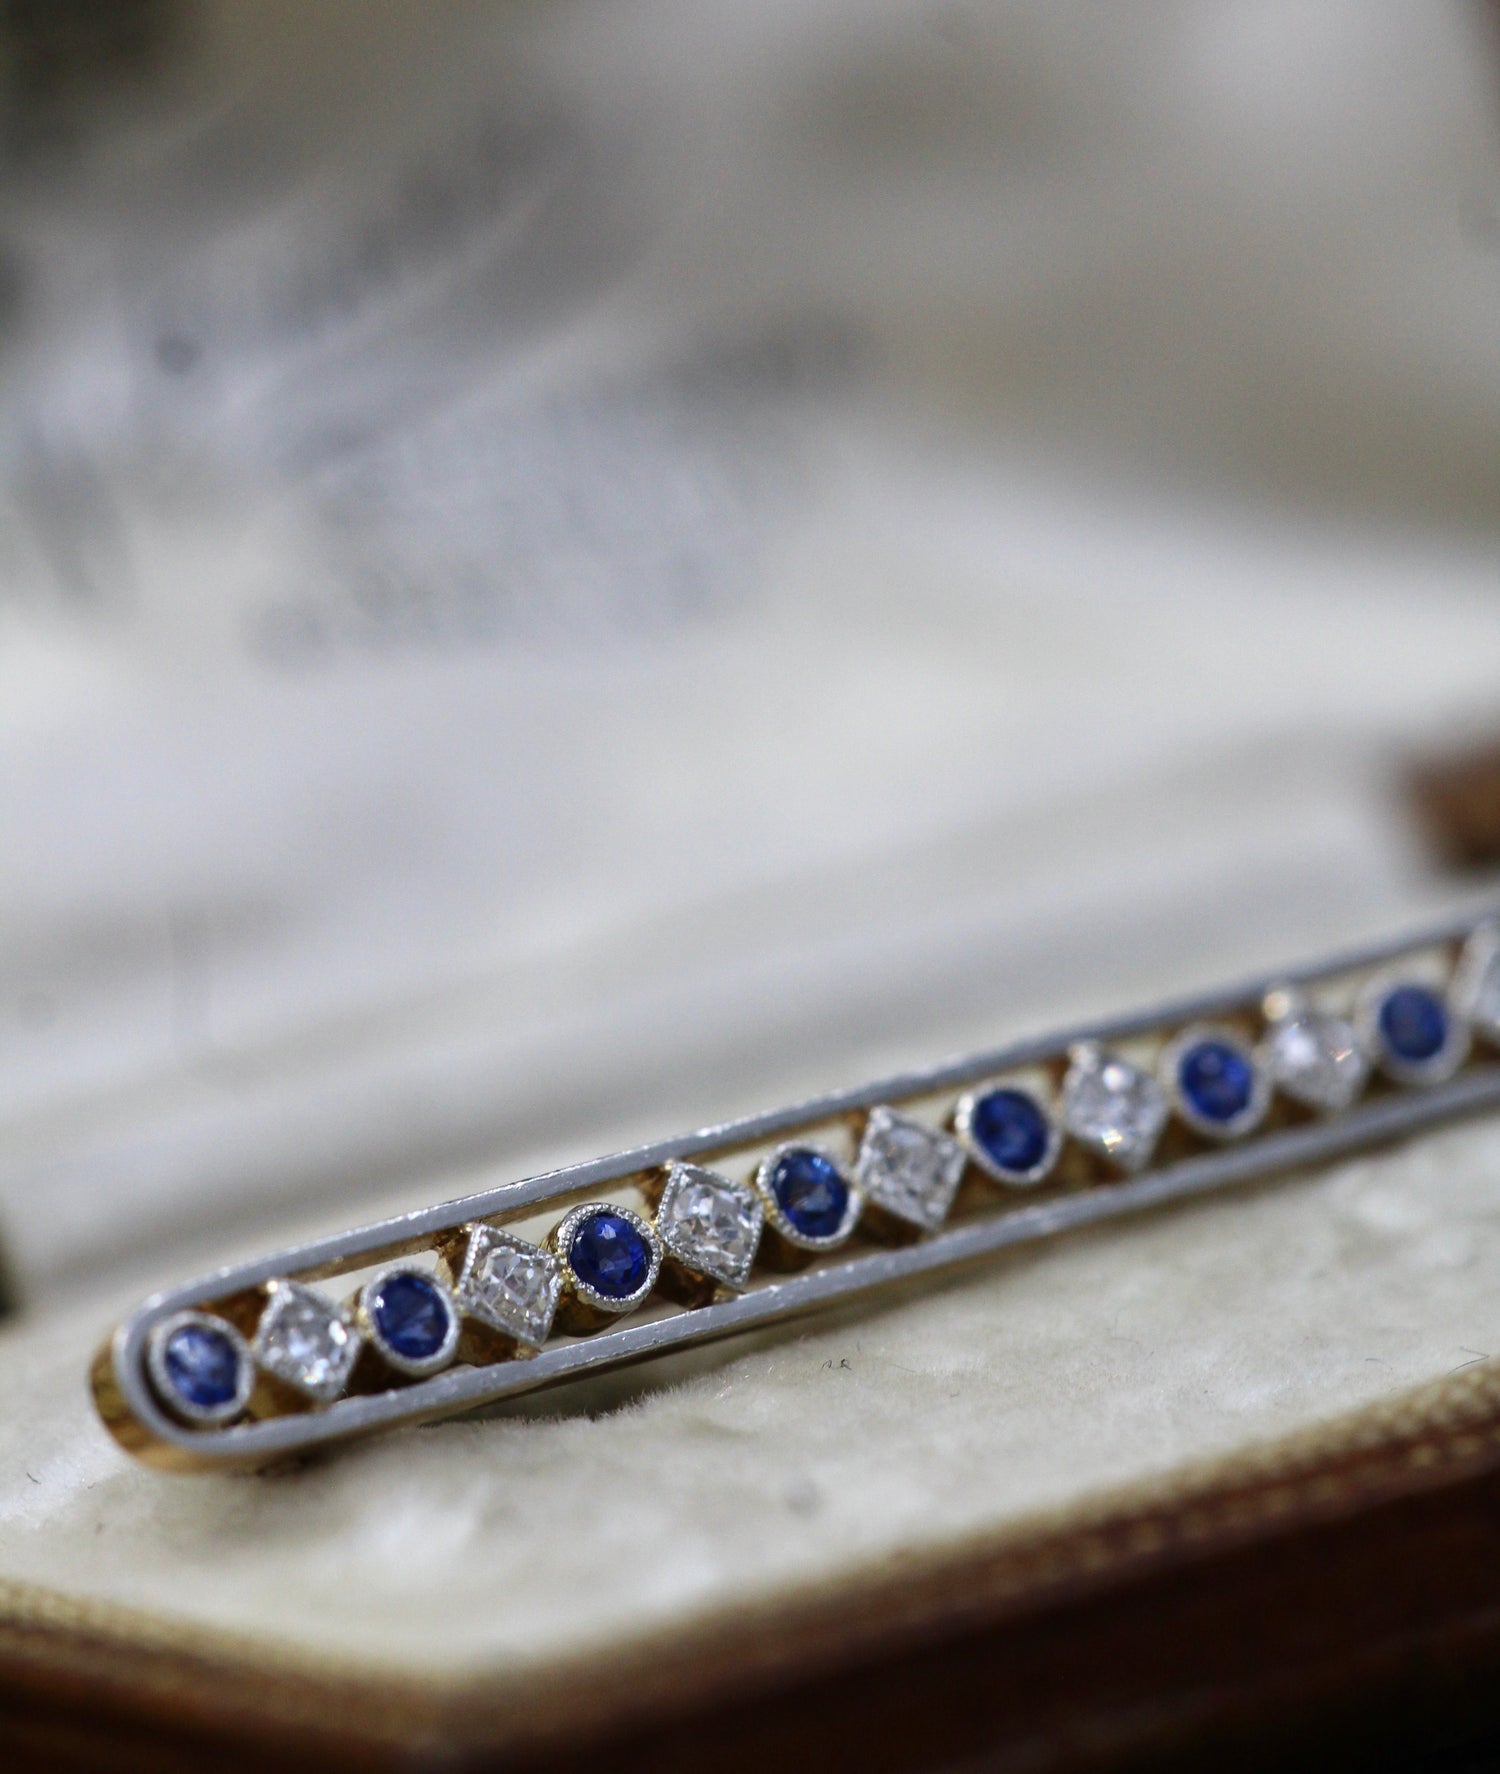 A very fine Diamond and Sapphire, Bar Brooch, in 18 Carat Yellow Gold (Tested) and Platinum, Circa 1920. - Robin Haydock Antiques